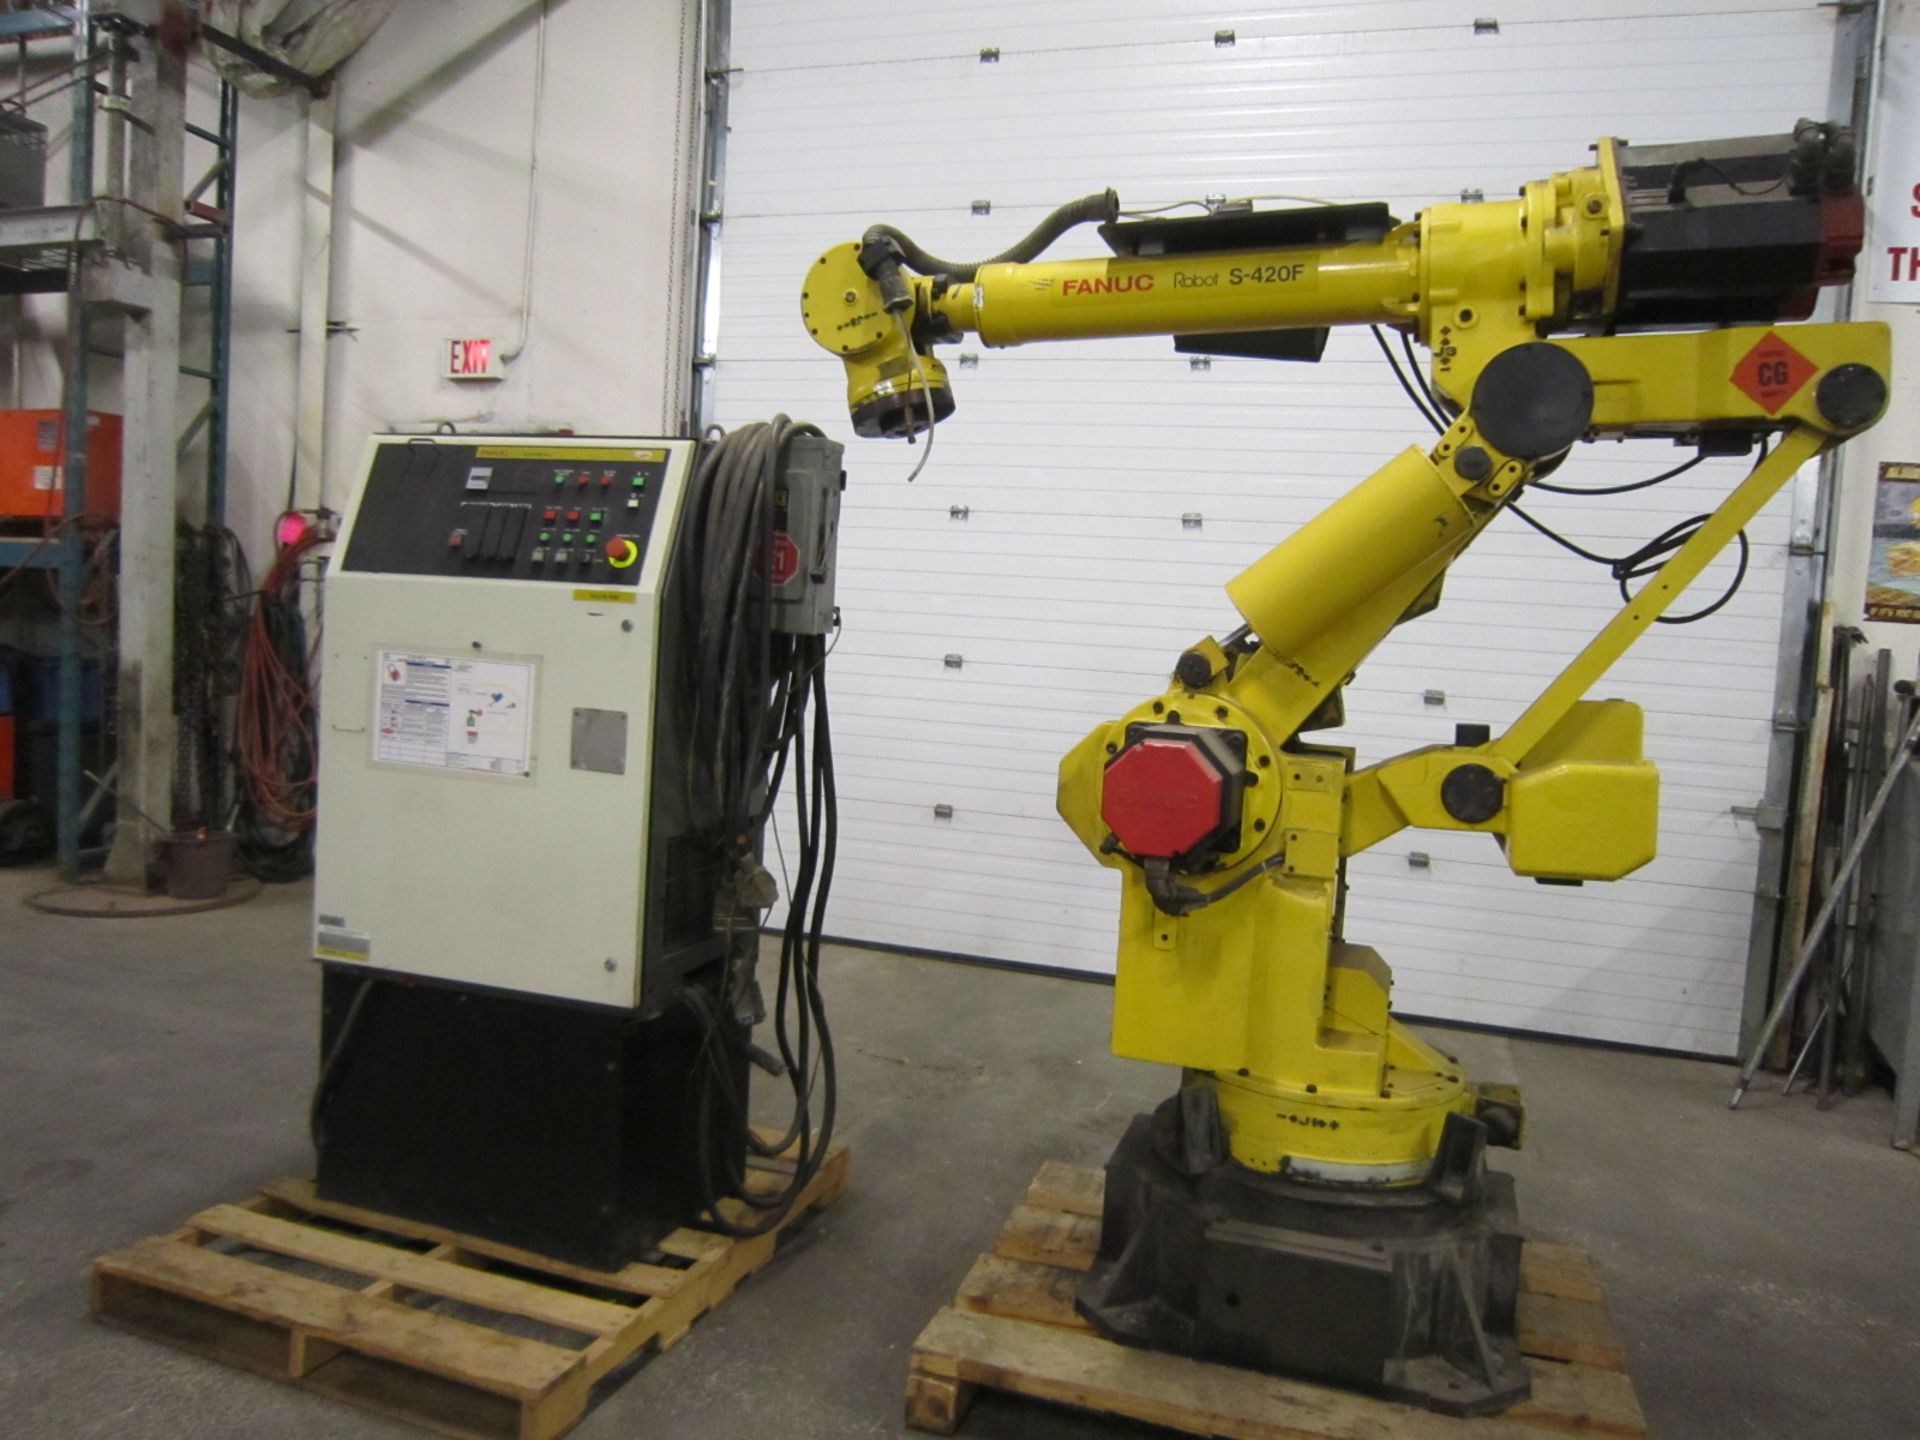 Fanuc S-420F Industrial Robot - 120kg capacity robotic system with Fanuc R-model J Controller with